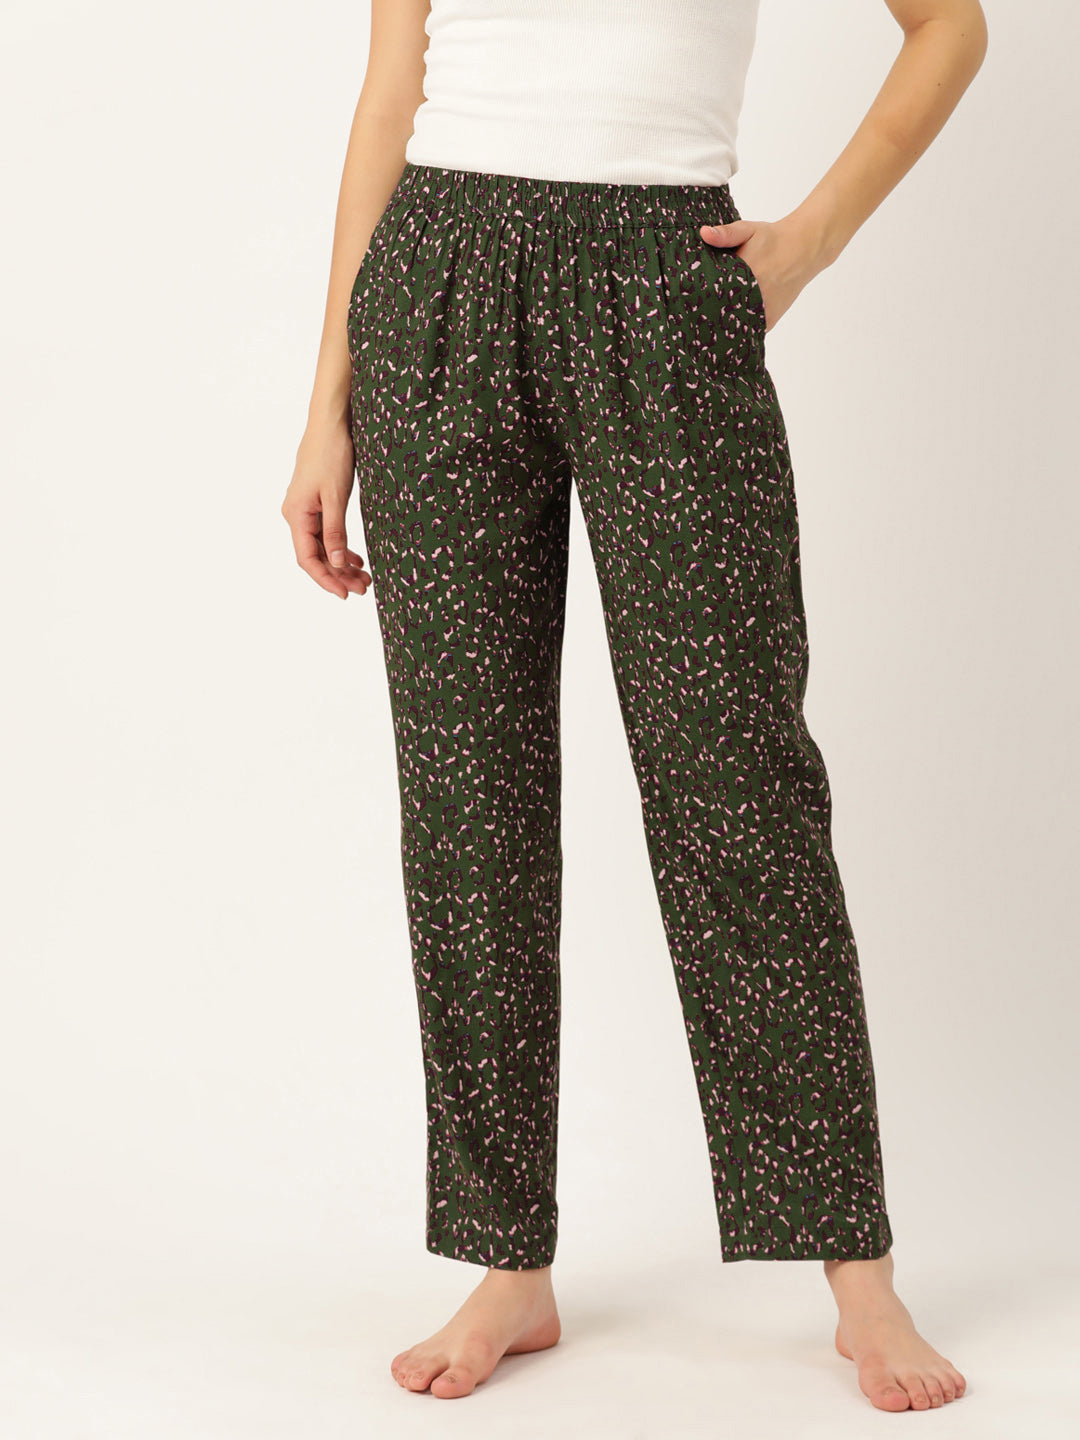 Pure Cotton Multicolored Printed Lounge Pants For Women